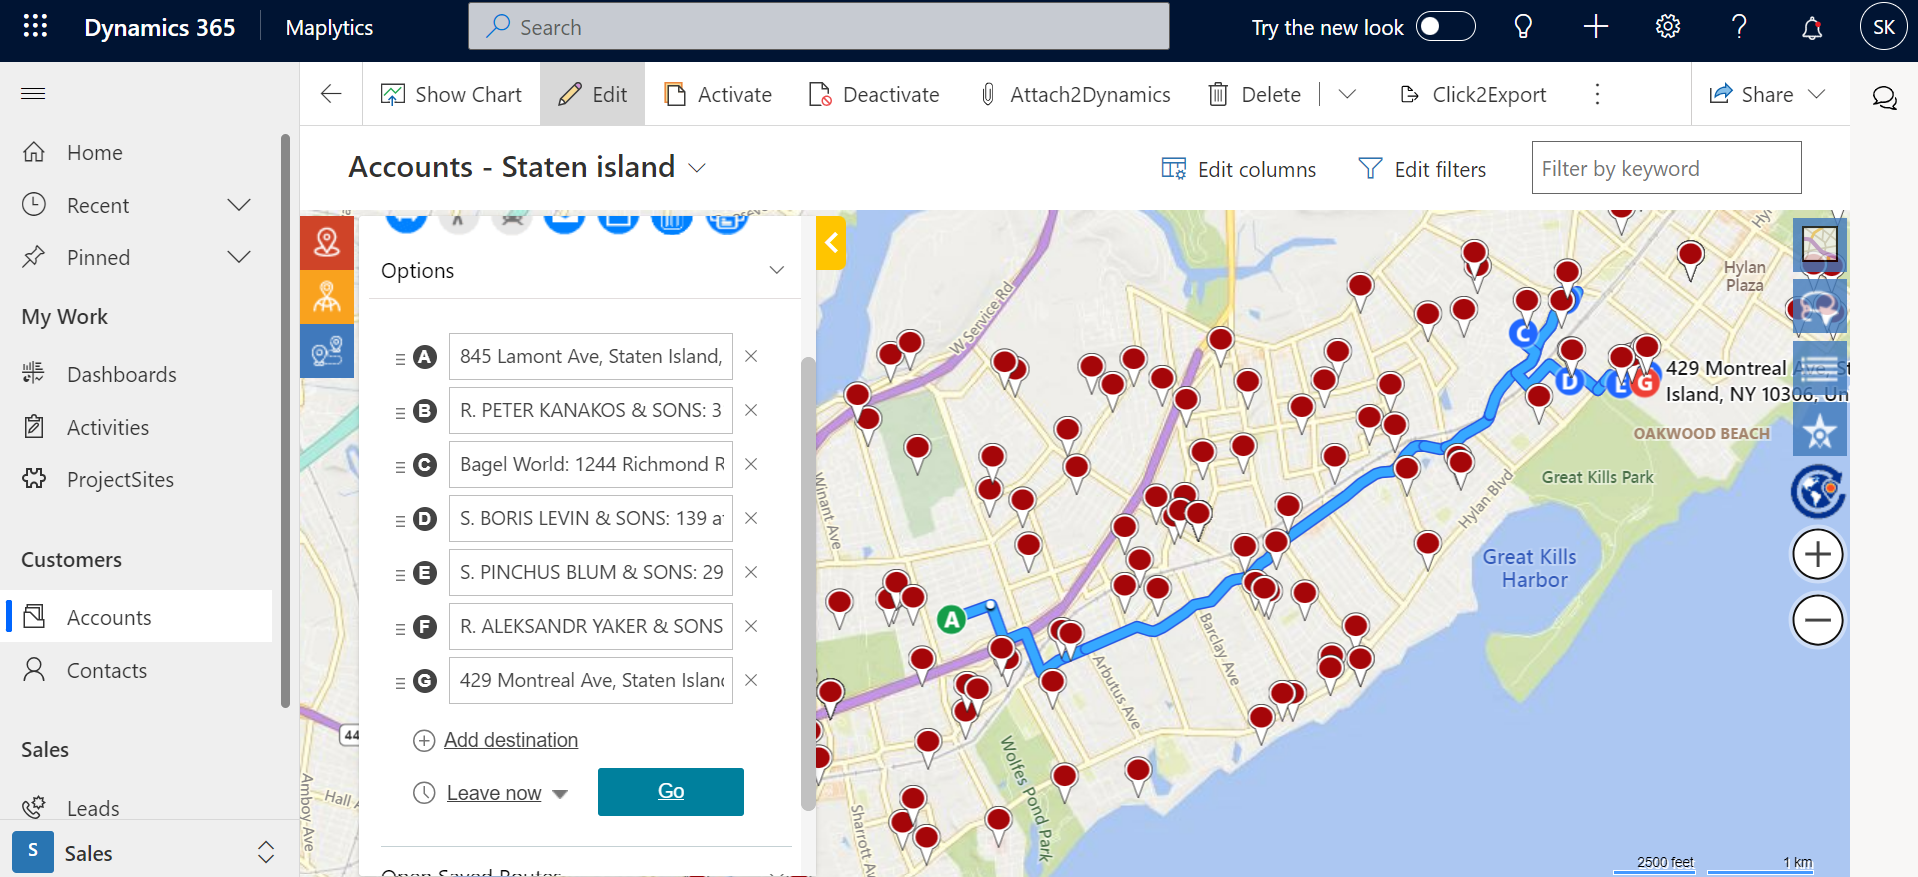 Travel Smart with Smart Routes planned within Microsoft Dynamics 365